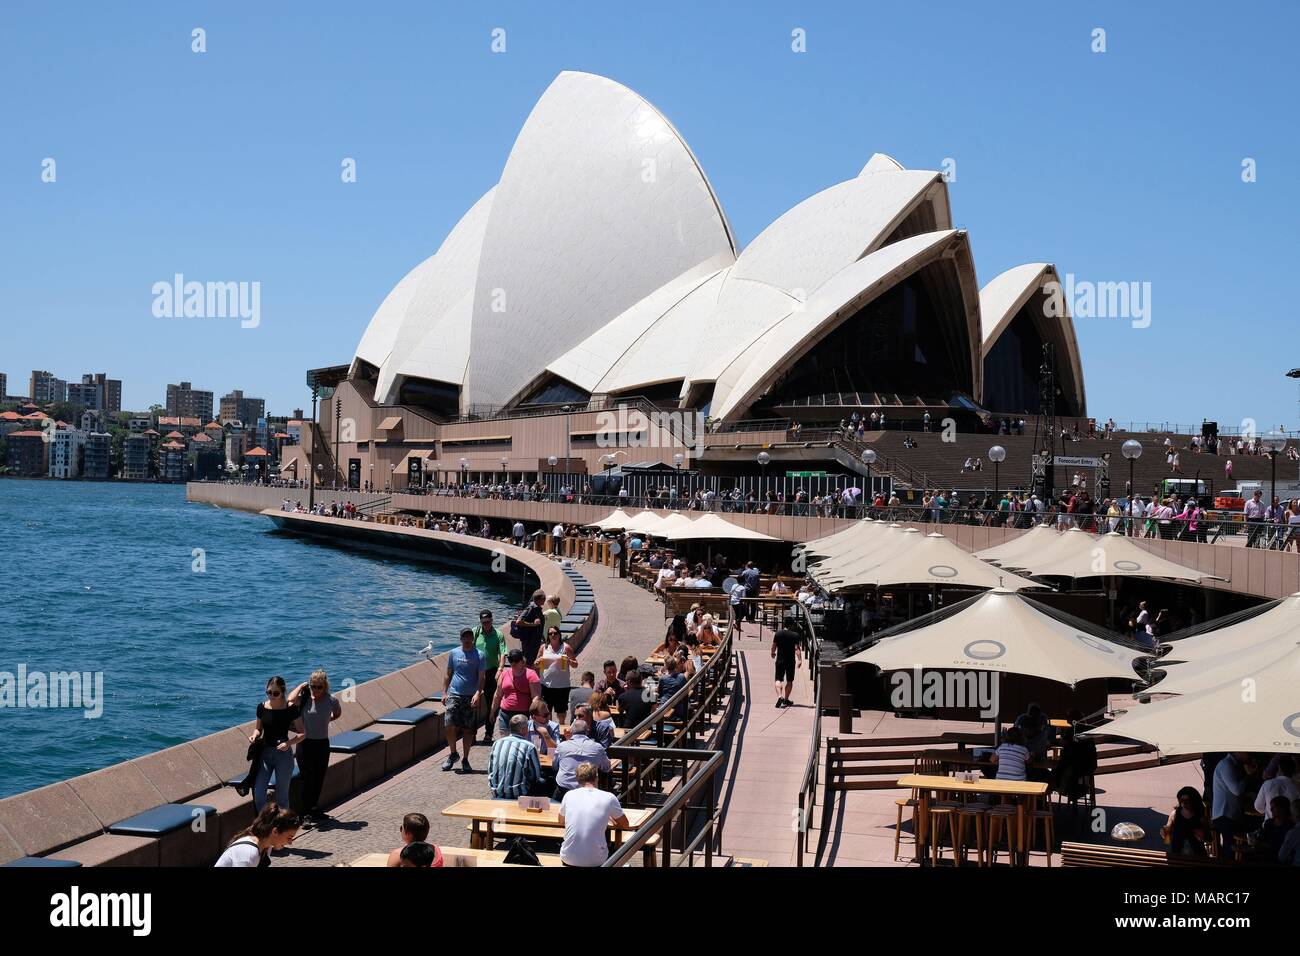 Opera House in Sydney - Australia - The Sydney Opera House is a multi-venue performing arts centre in Sydney, New South Wales, Australia. It is one of the 20th century's most famous and distinctive buildings. Designed by Danish architect JÃ_rn Utzon in 195 | usage worldwide Stock Photo